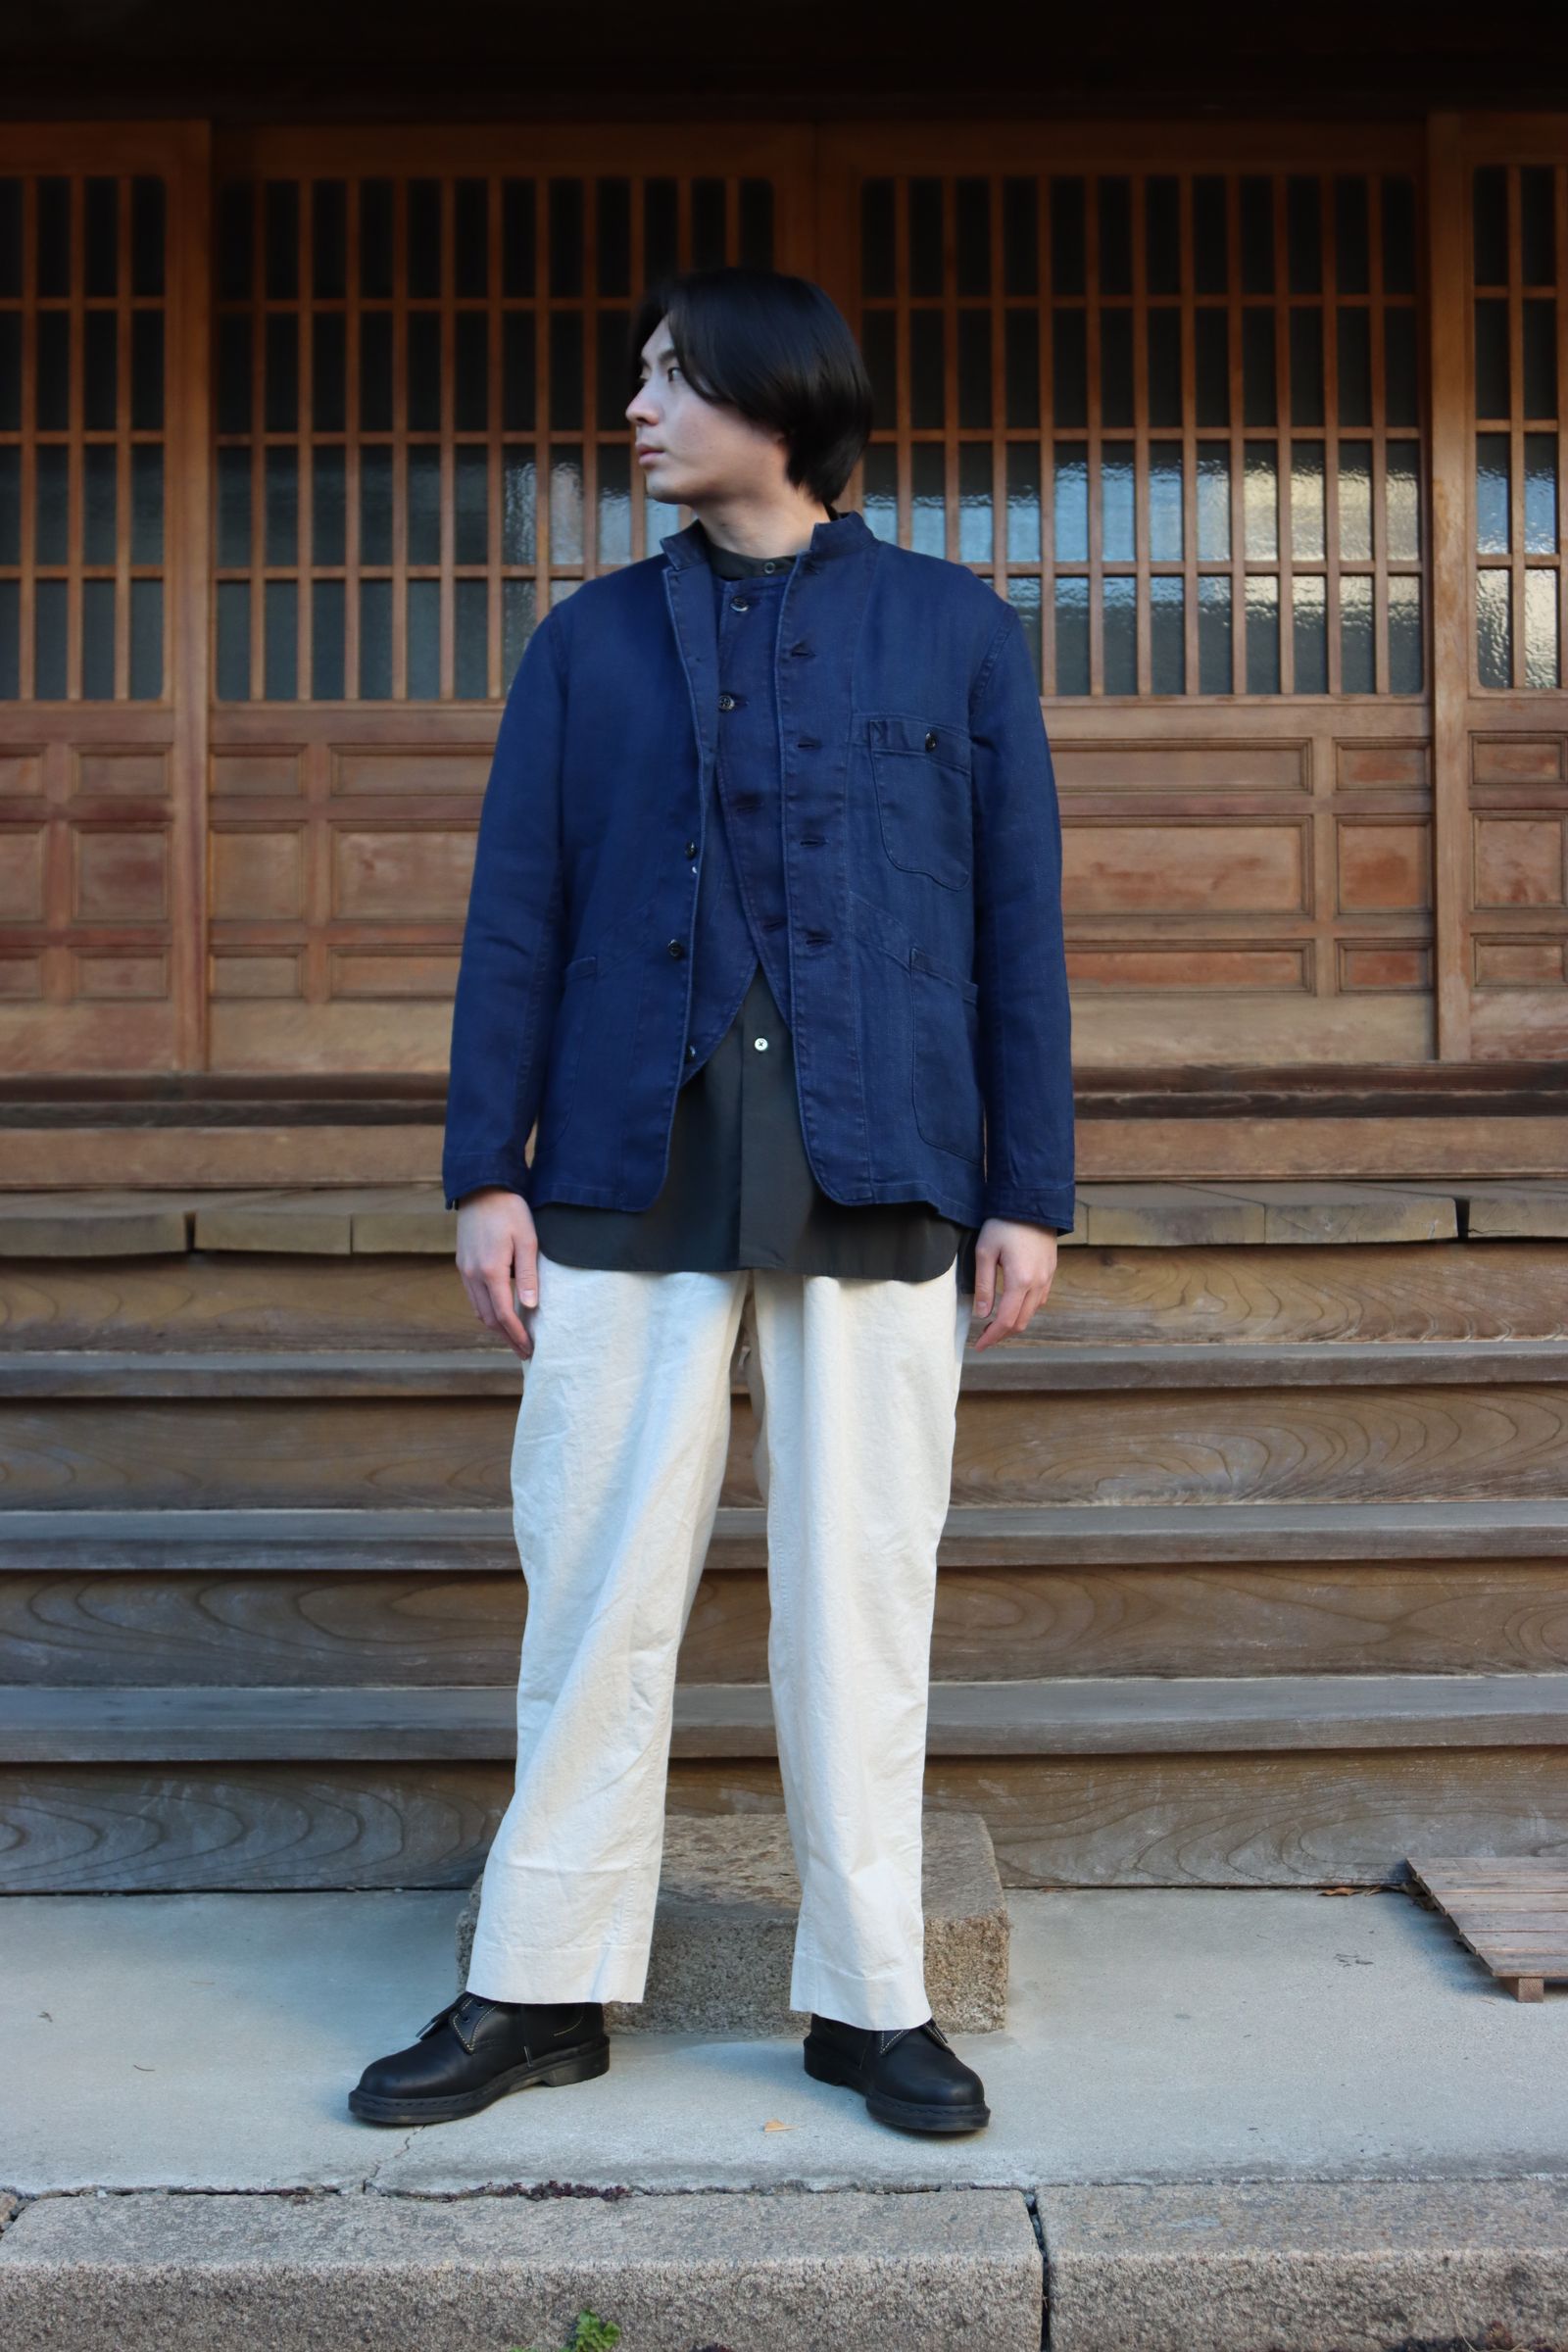 ETS.MATERIAUX /  FRENCH WORK COVERコート